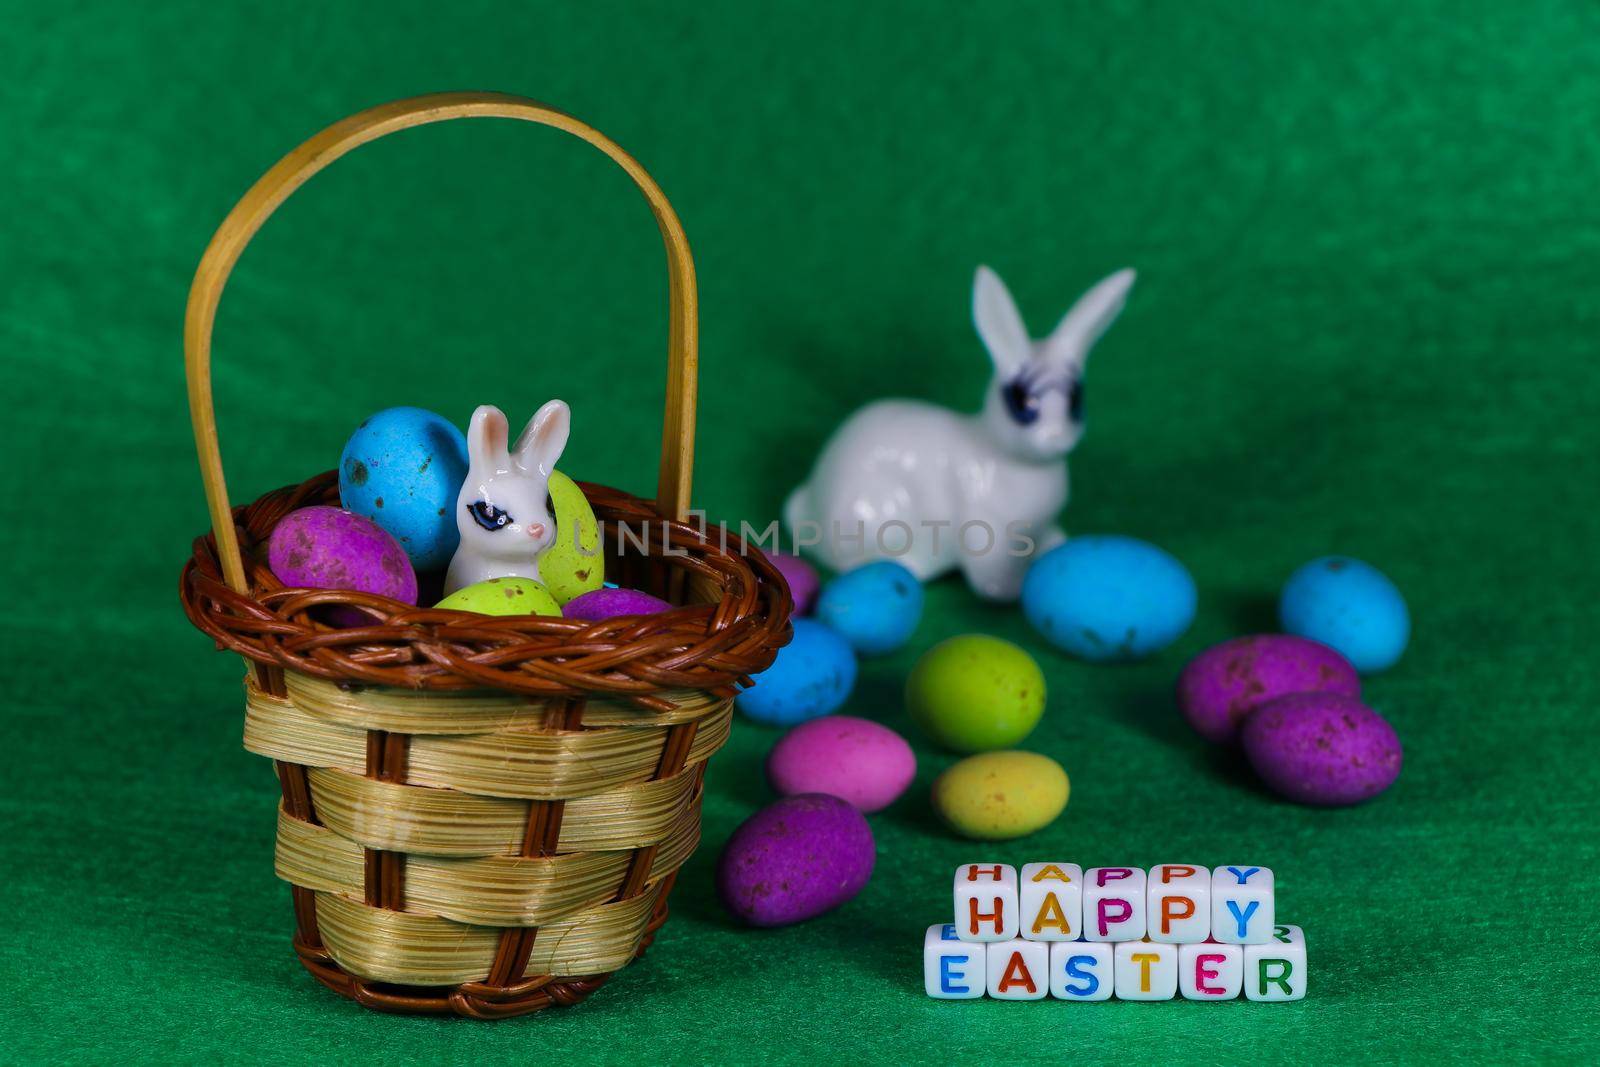 Happy Easter Bunny In Basket With Colorful Eggs by jjvanginkel